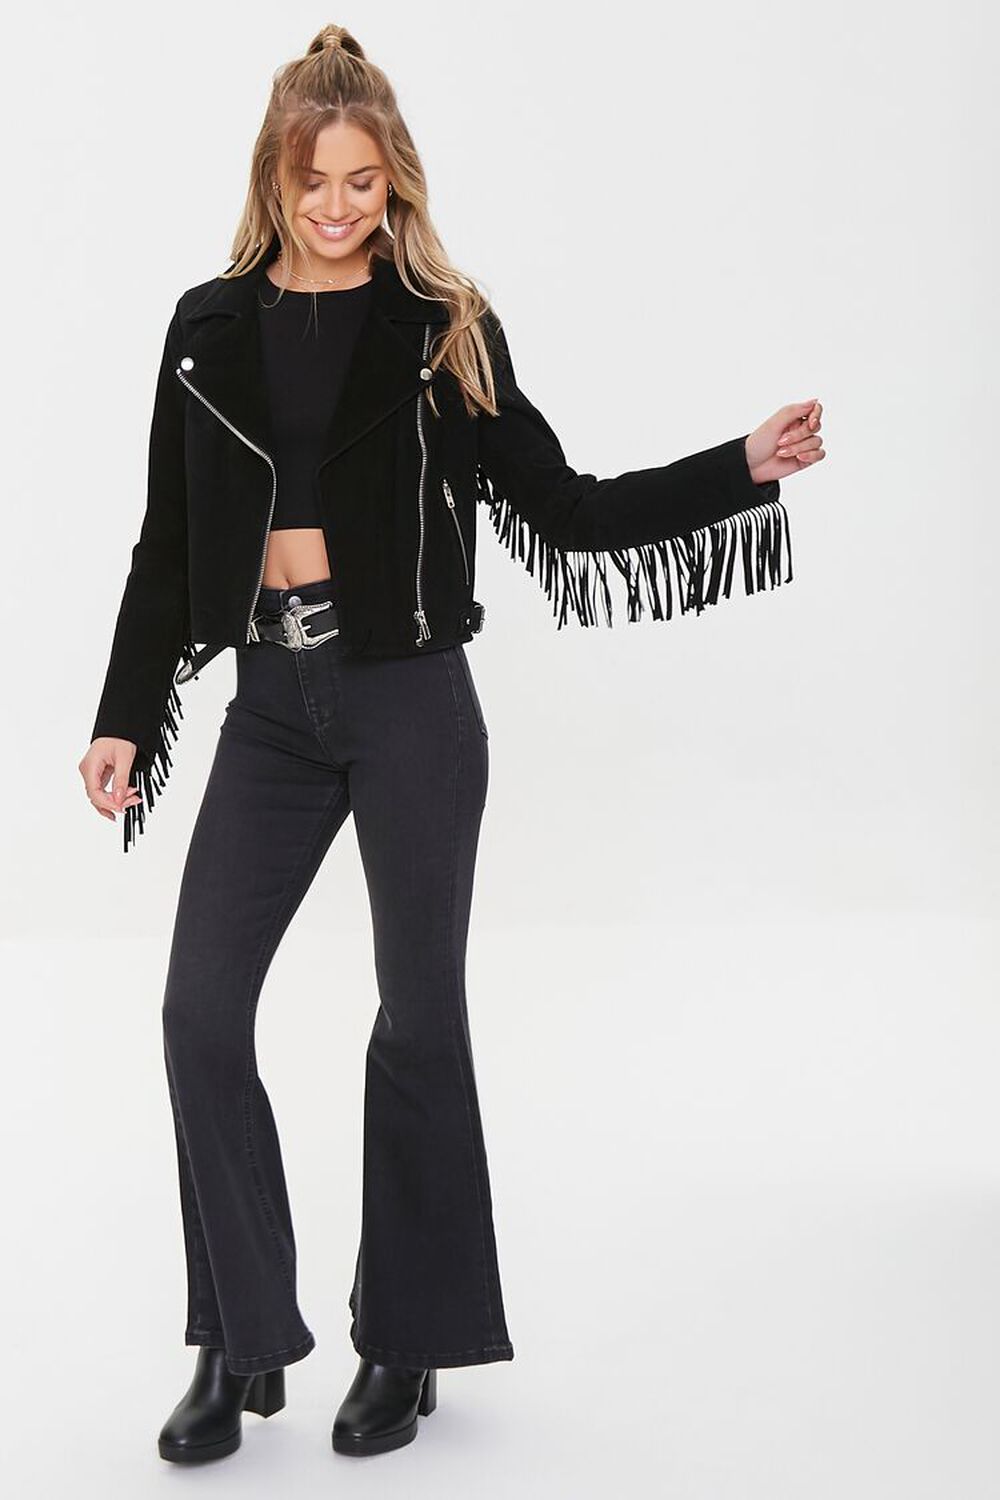 WASHED BLACK High-Rise Flare Jeans, image 1